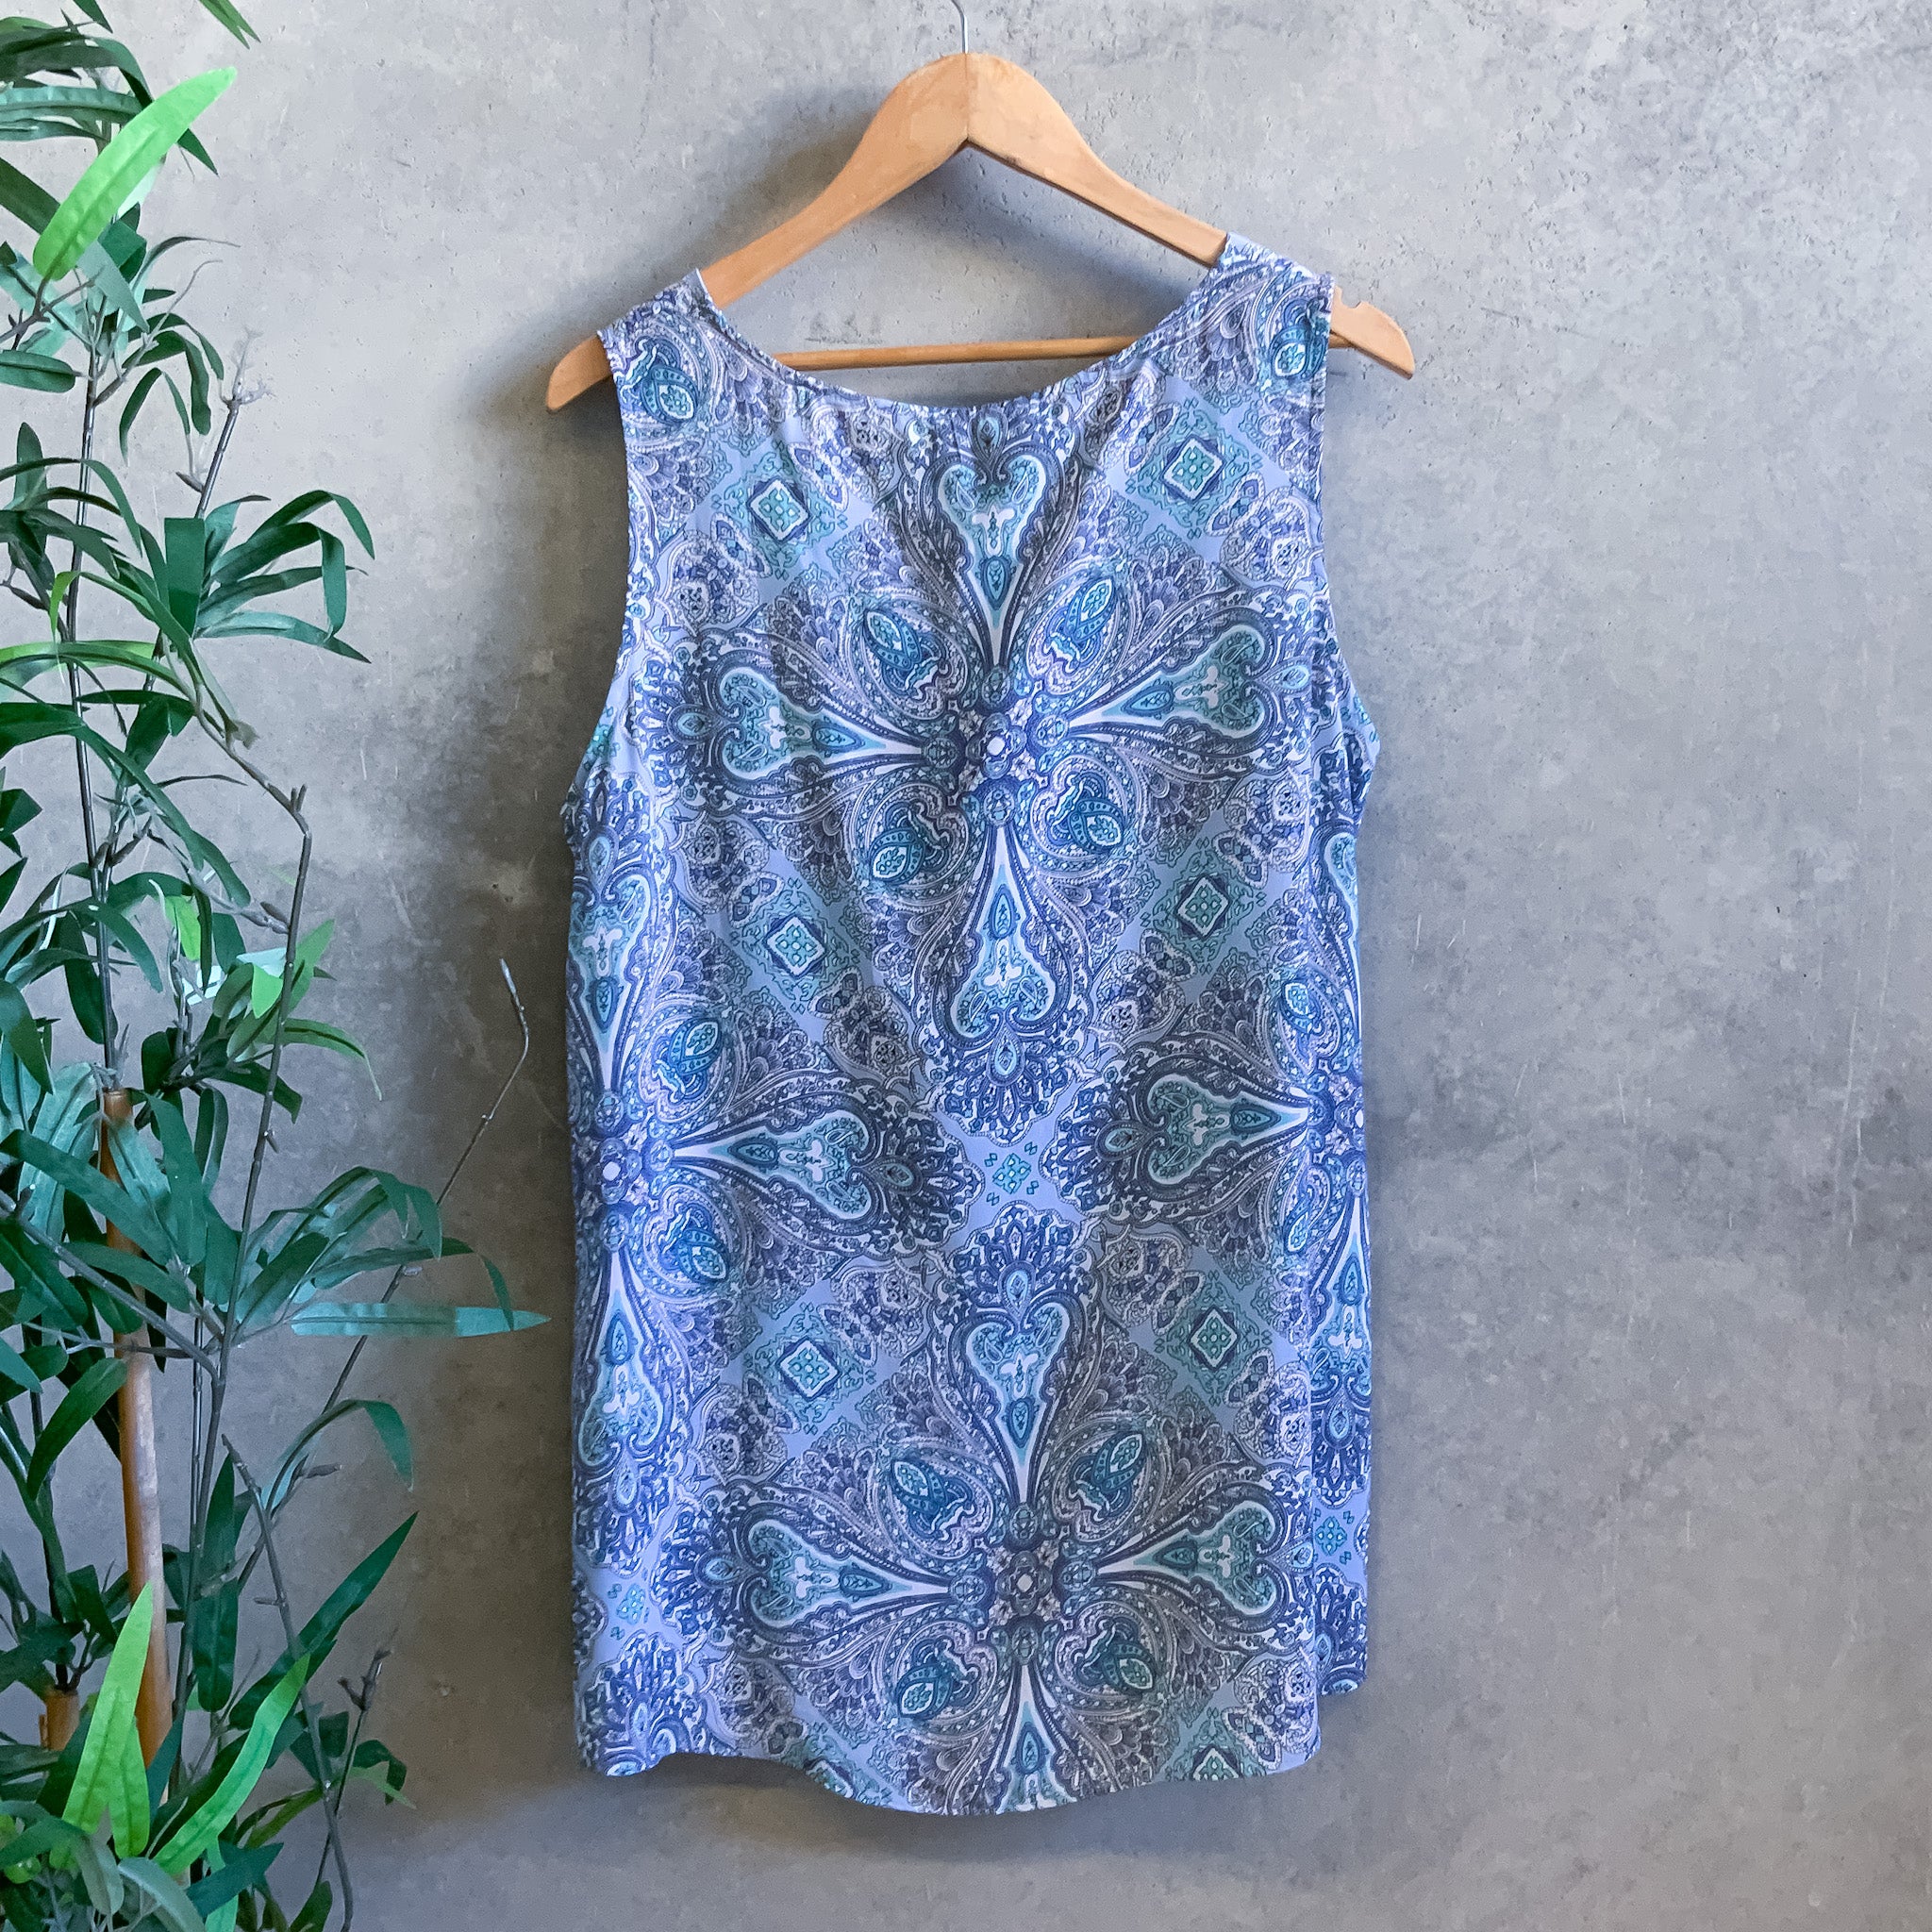 BNWT TABLE EIGHT Blue Paisley Print V-Neck Sleeveless Casual Top - Size 16